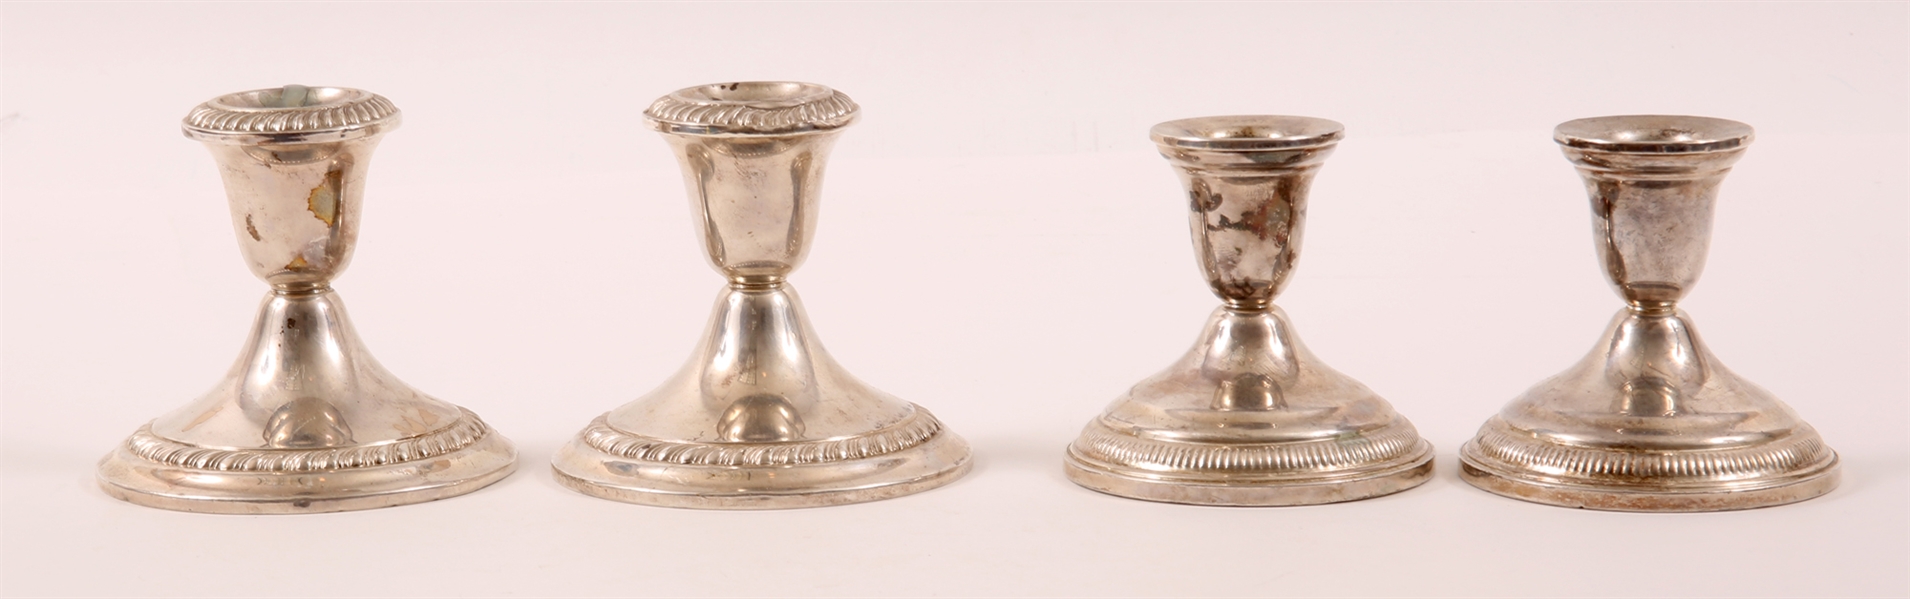 STERLING SILVER WEIGHTED CANDLESTICK SETS - LOT OF 2